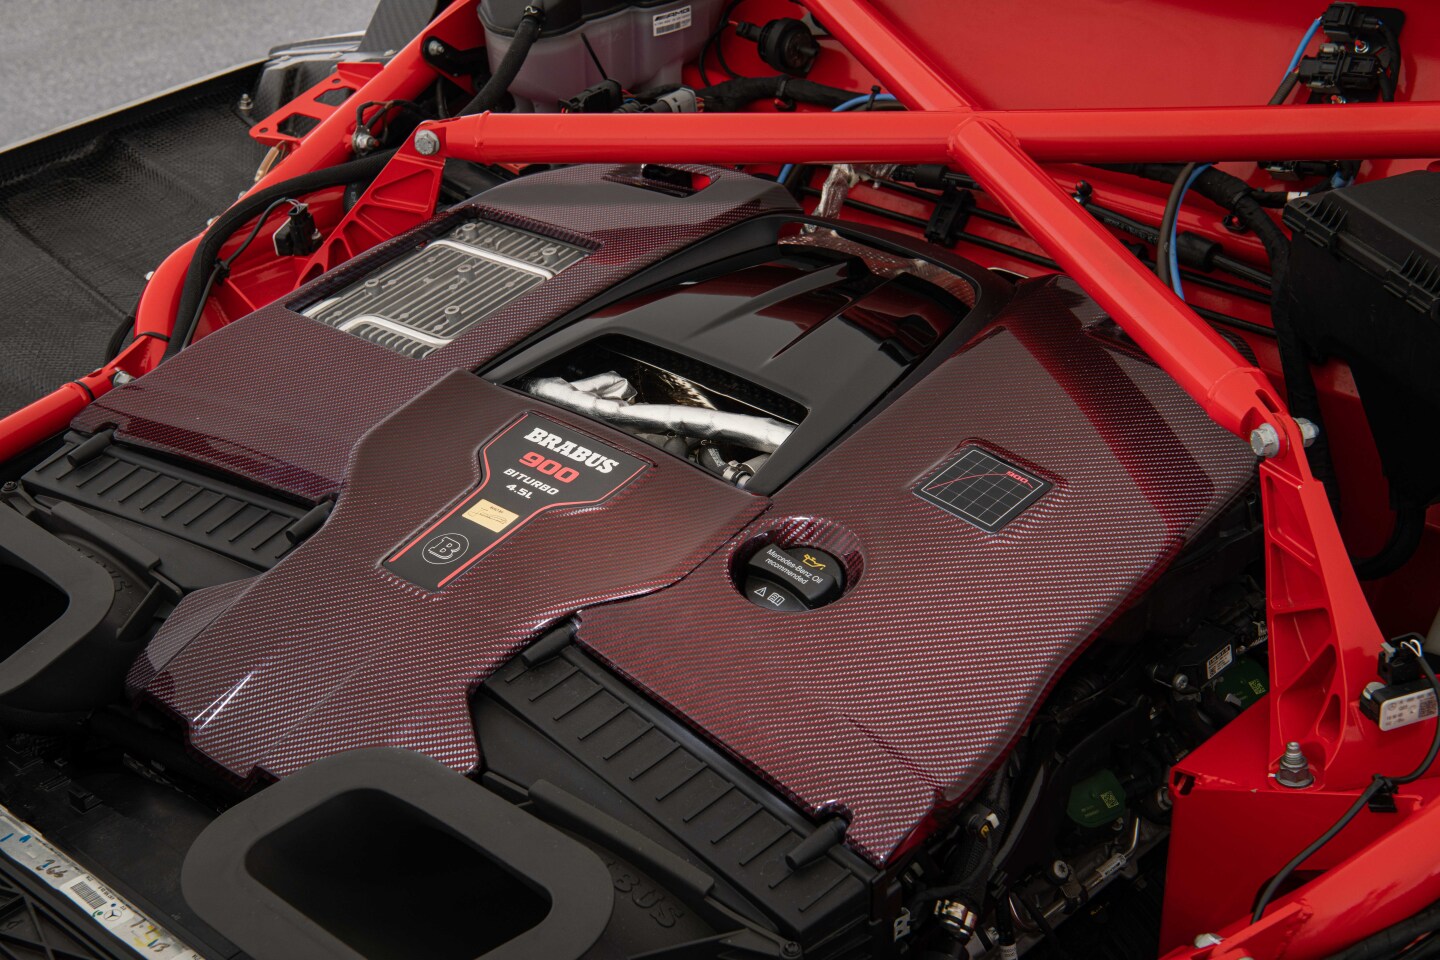 While it stripped the body and interior down, Brabus did build up the engine into an ultra-powerful centerpiece